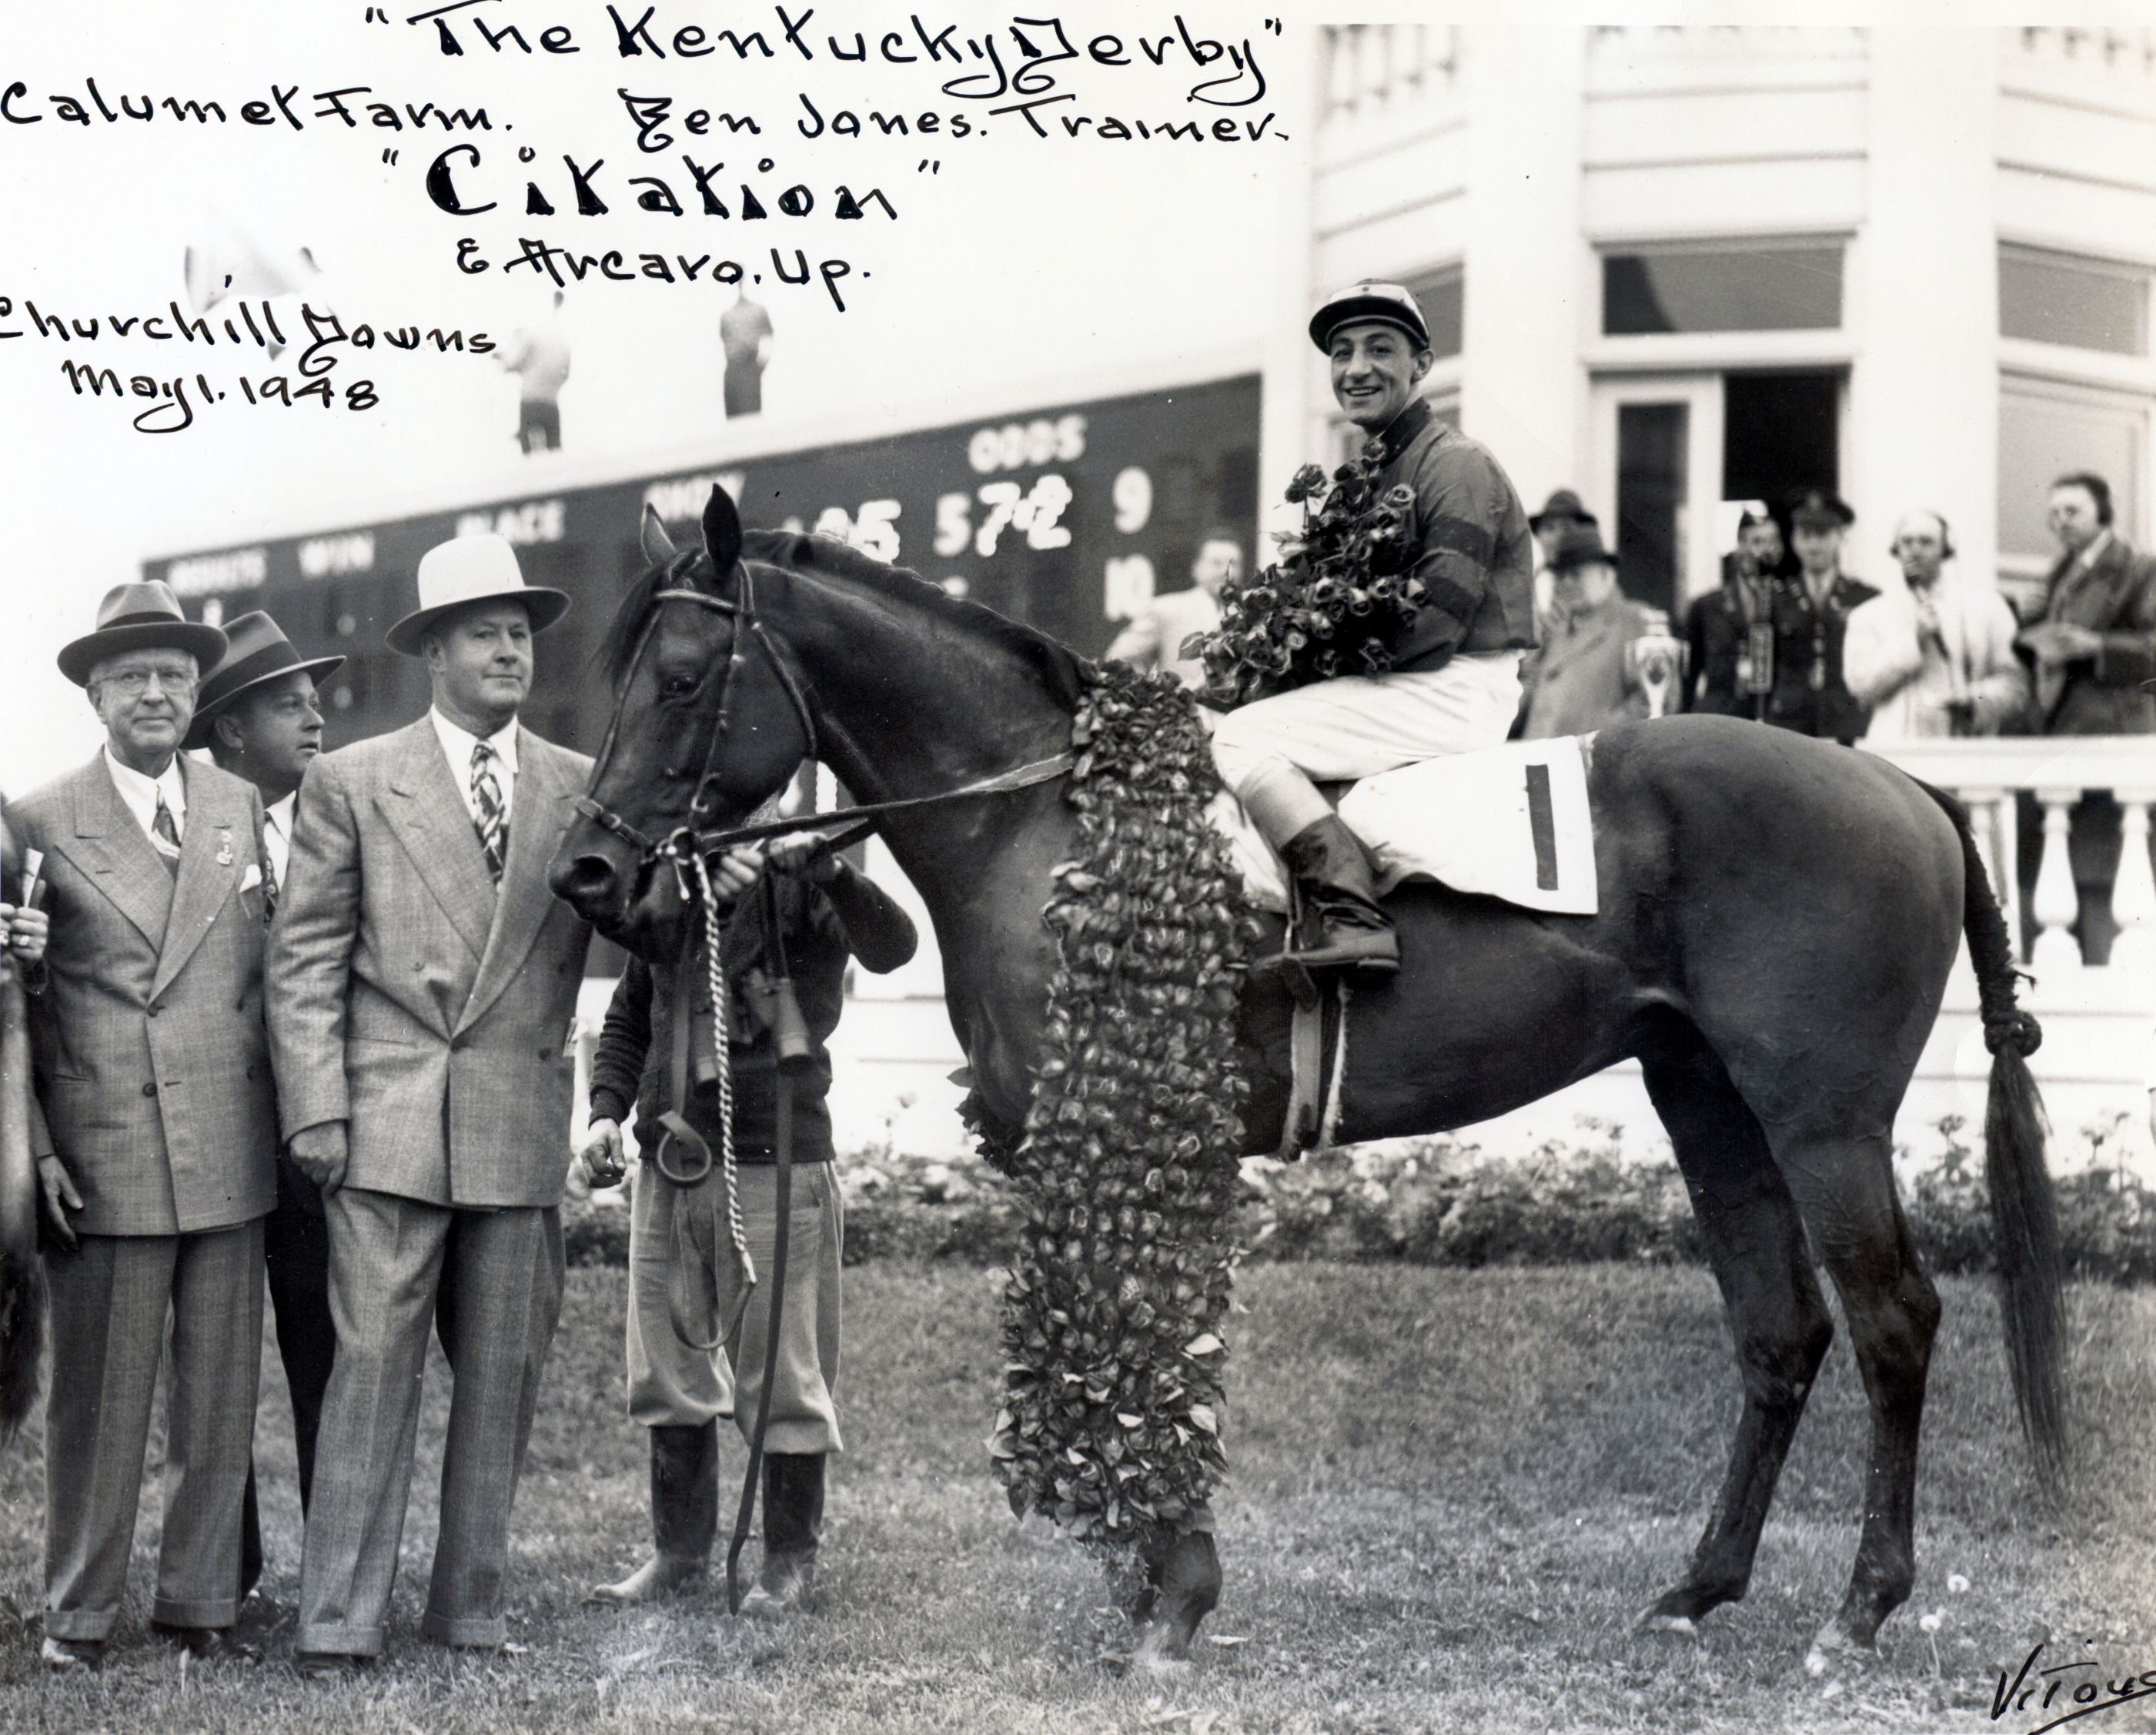 Winner's circle photo for the 1948 Kentucky Derby, won by Citation (Museum Collection)